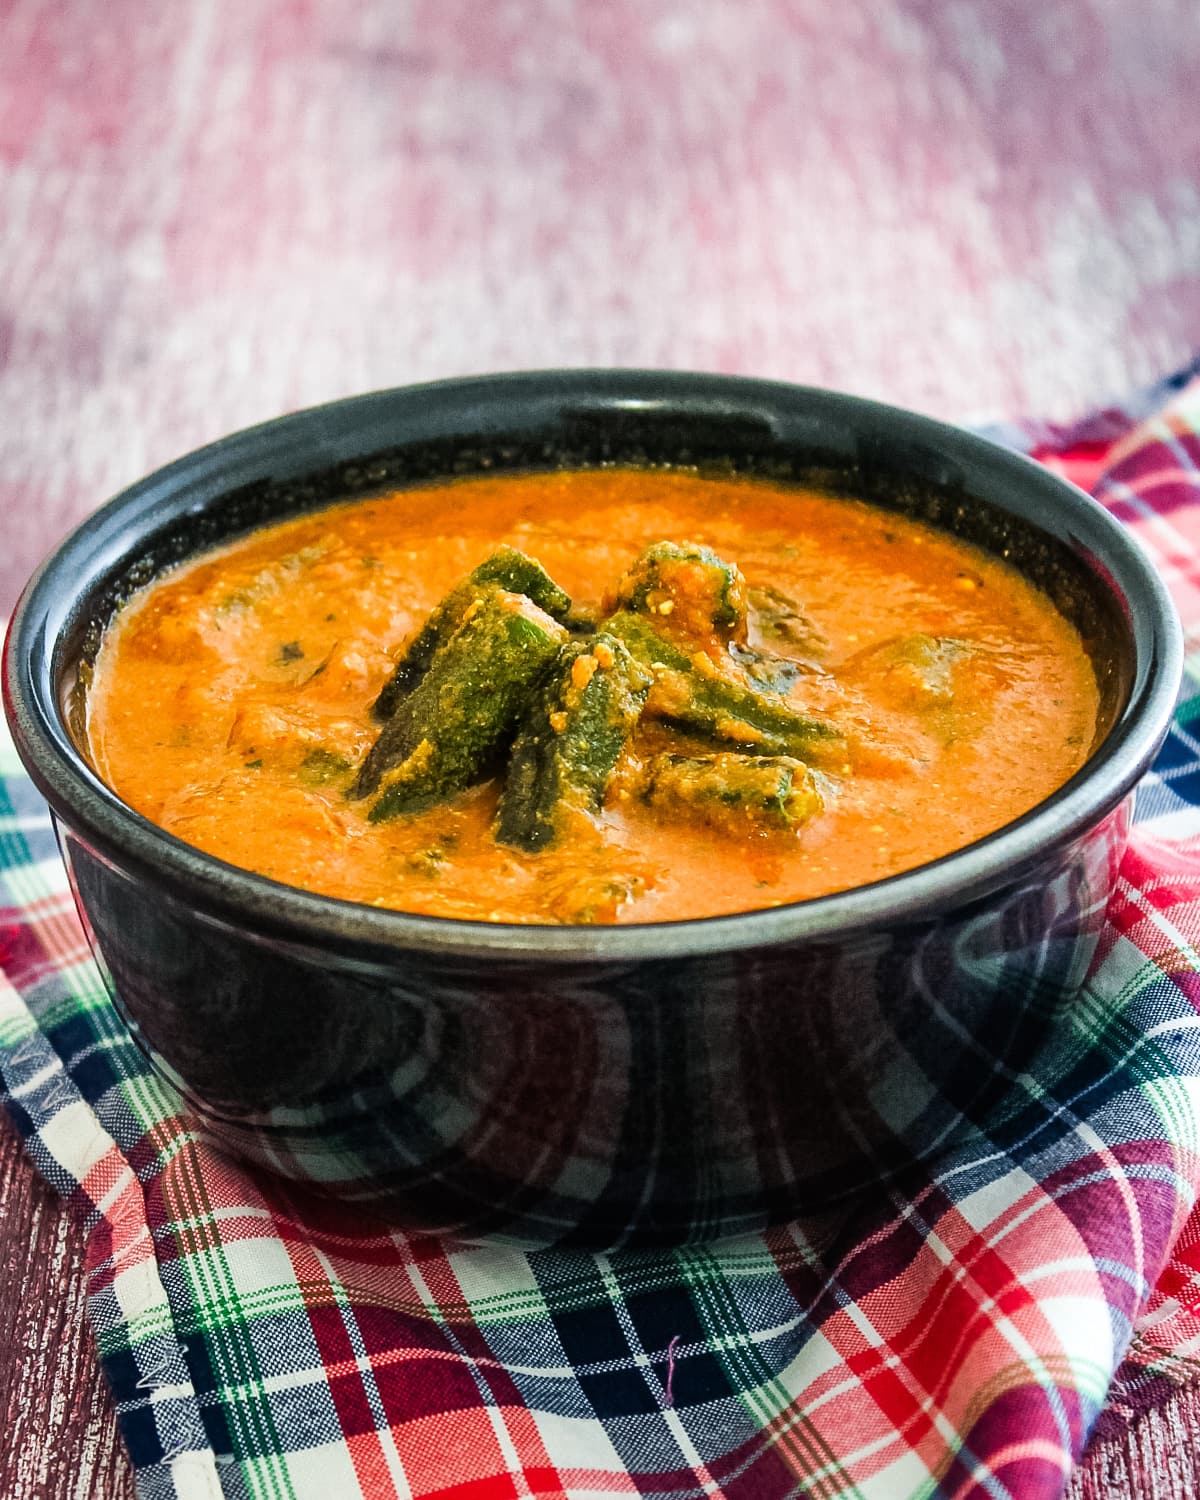 Bhindi curry in a bowl with napkin underneath the bowl.